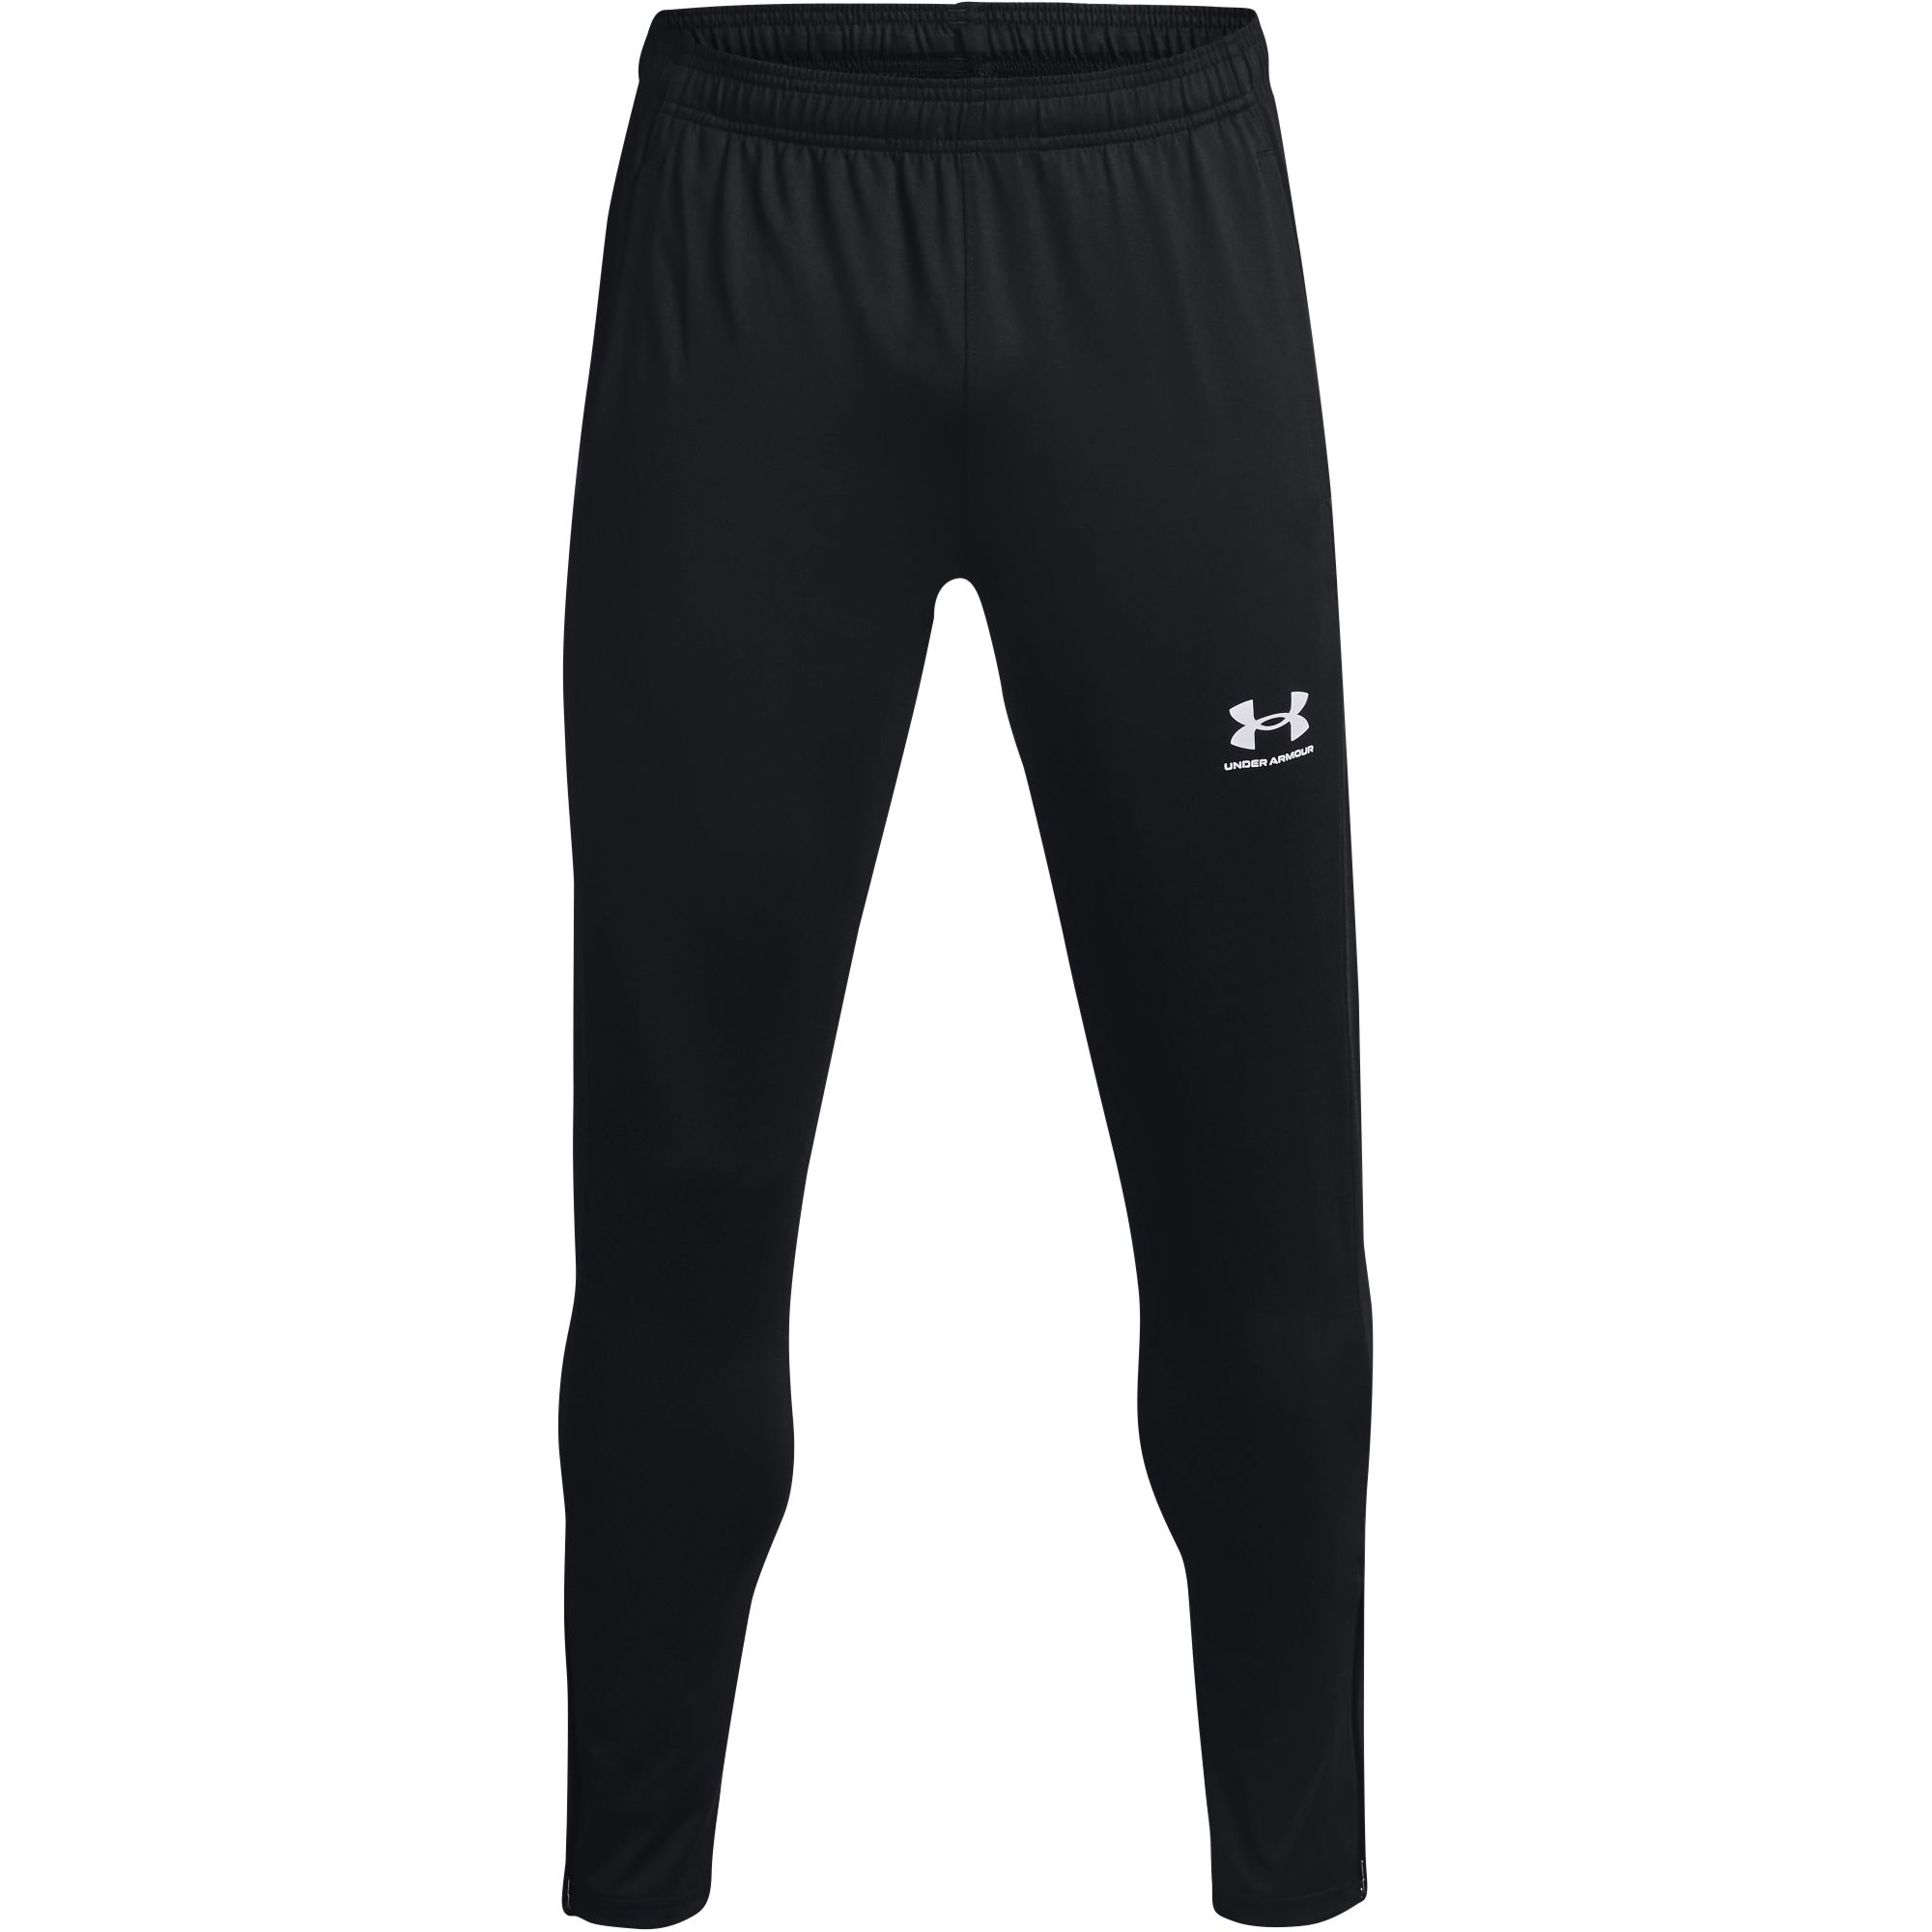 Challenger Training Pant Casual imagine 2022